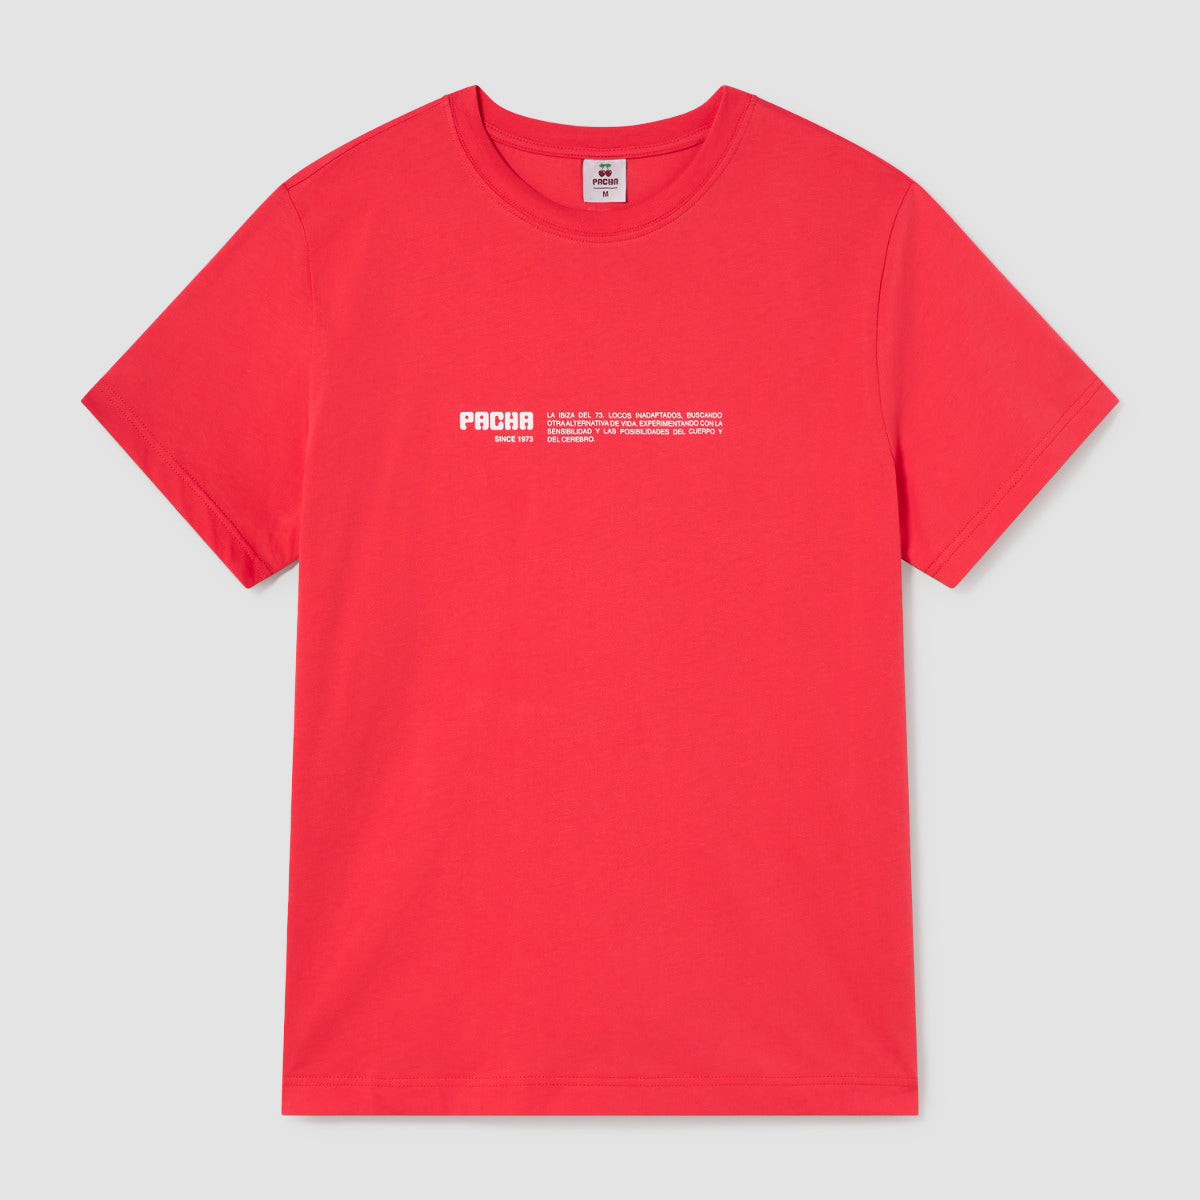 1973 Red T-shirt